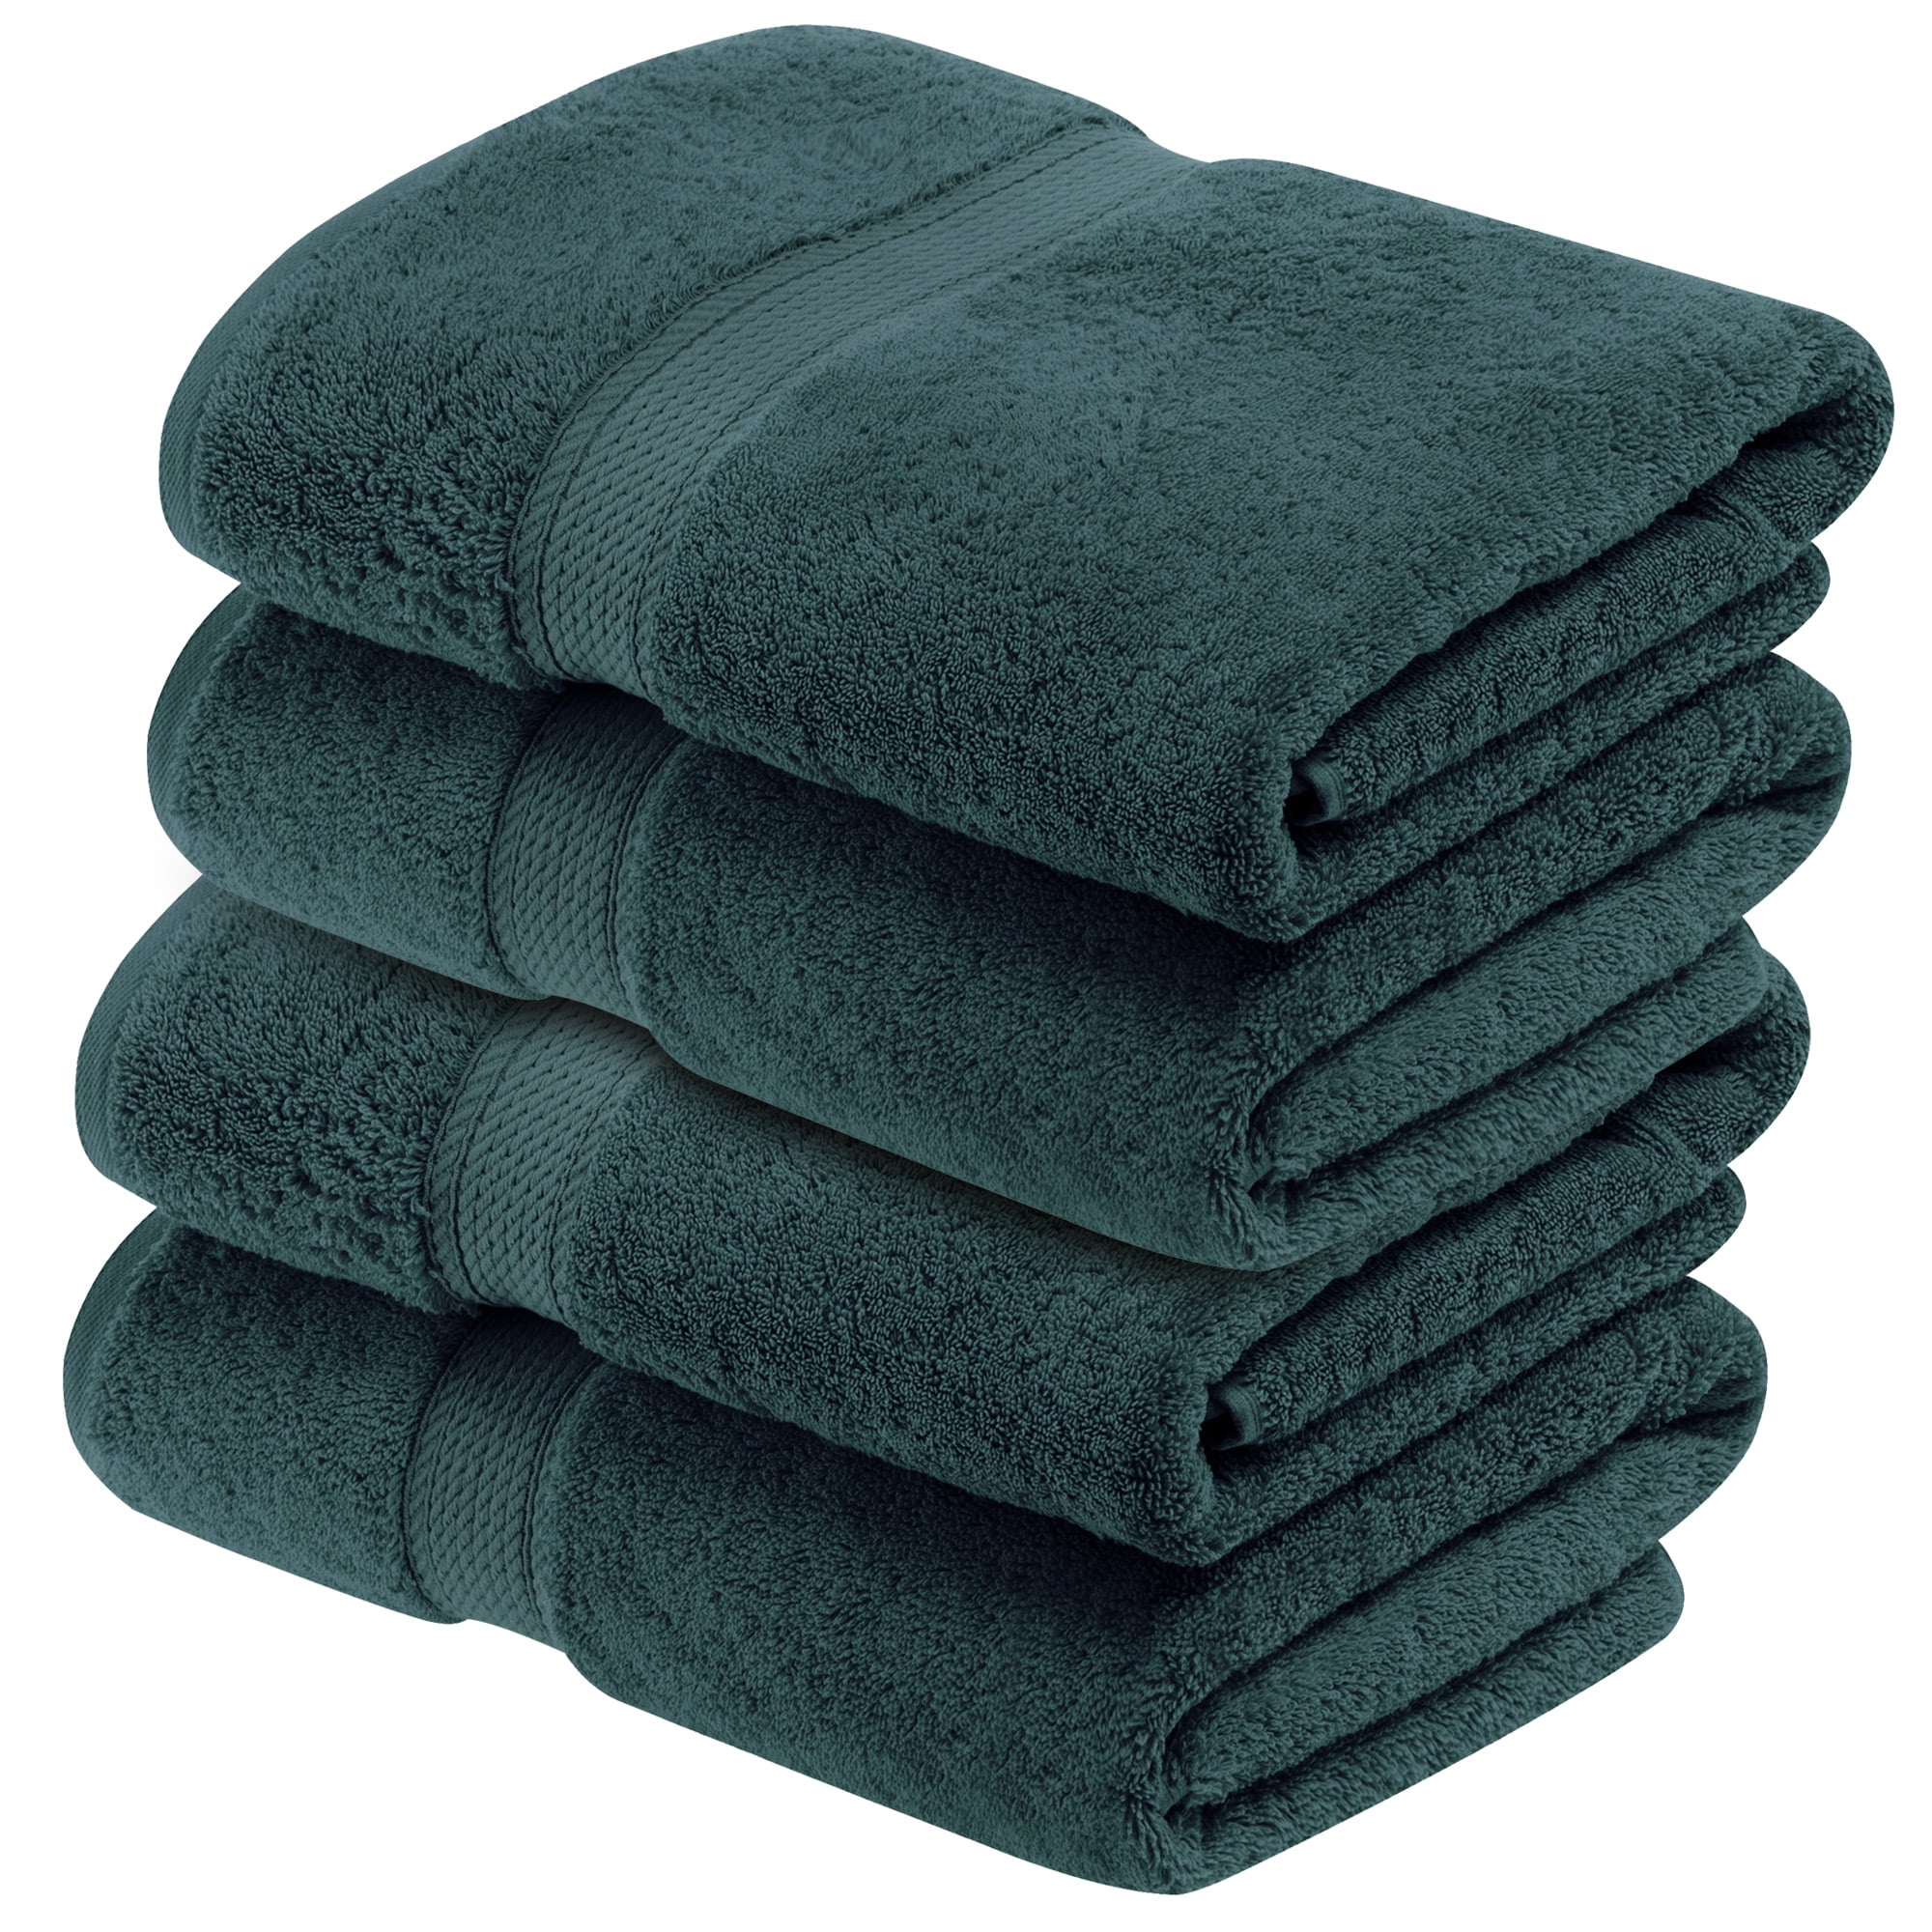 Mosobam Hotel Luxury 14pc Deluxe Bath Bundle 1000 GSM Bath Mats 20x34 and 700 GSM Bath Towels at 30x58 16x30 and 13x13, Light Grey, Viscose Made